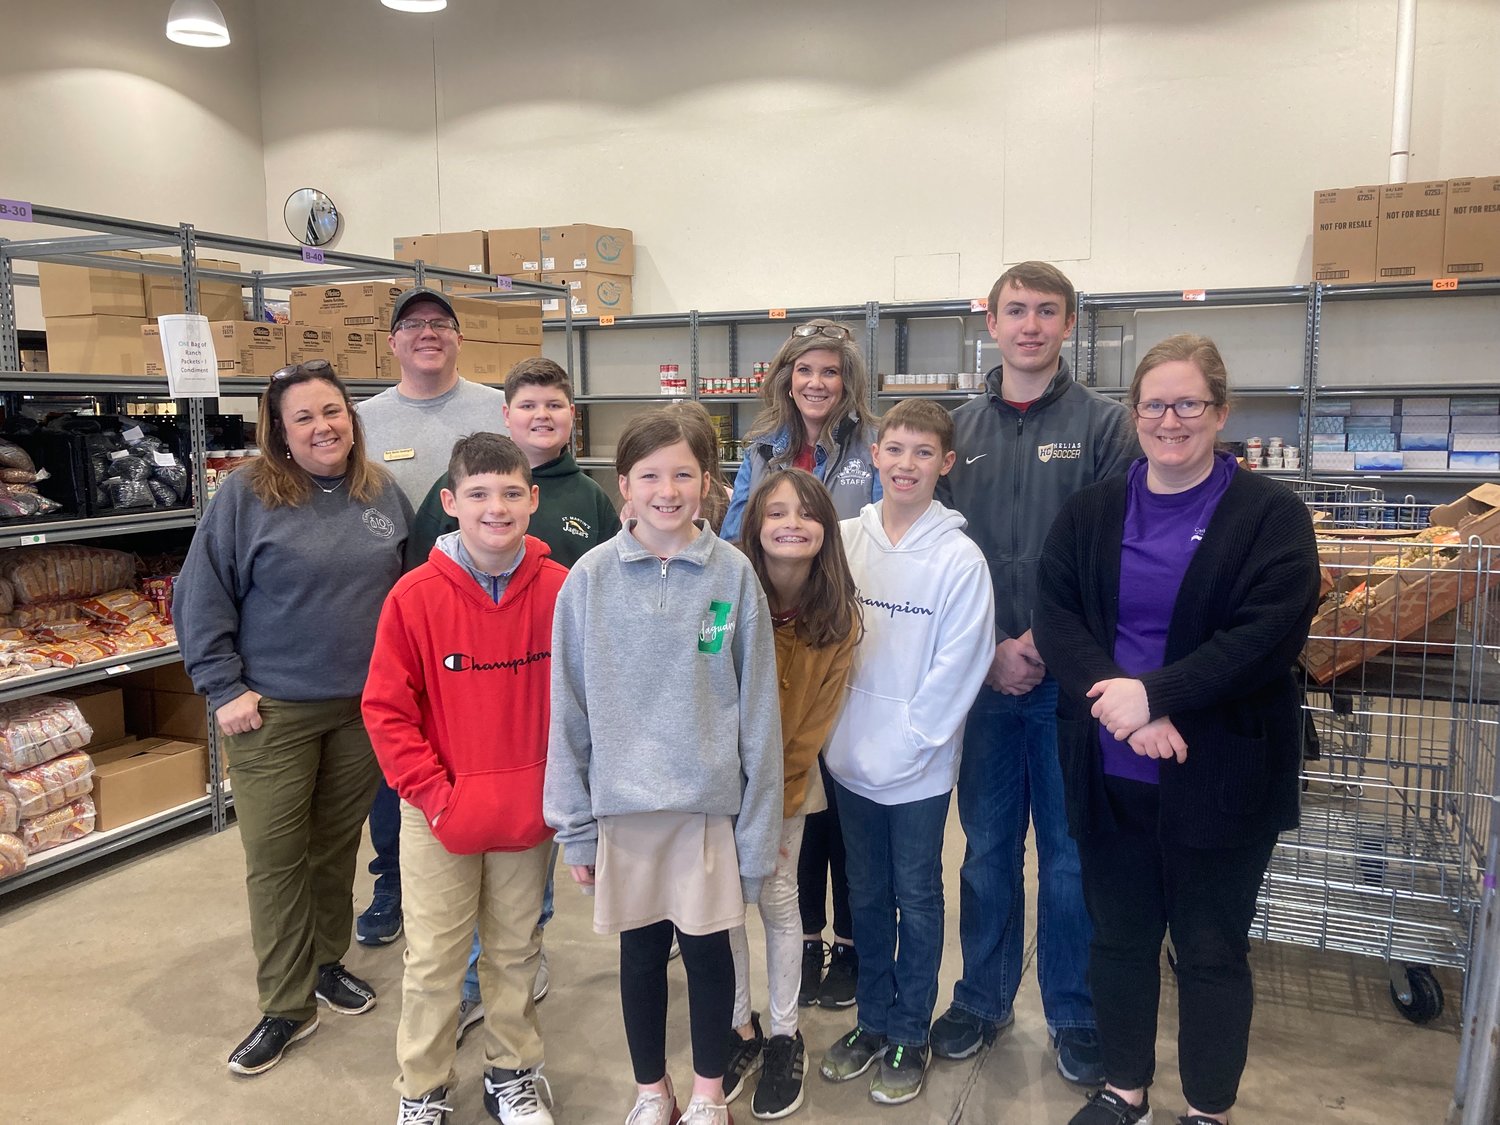 A group of fourth- through eighth-graders from St. Martin School in St. Martins conclude a Faith Families service project with staff at the Catholic Charities Center in Jefferson City. They toured the facility and then gave their time in service in the Catholic Charities Food Pantry.